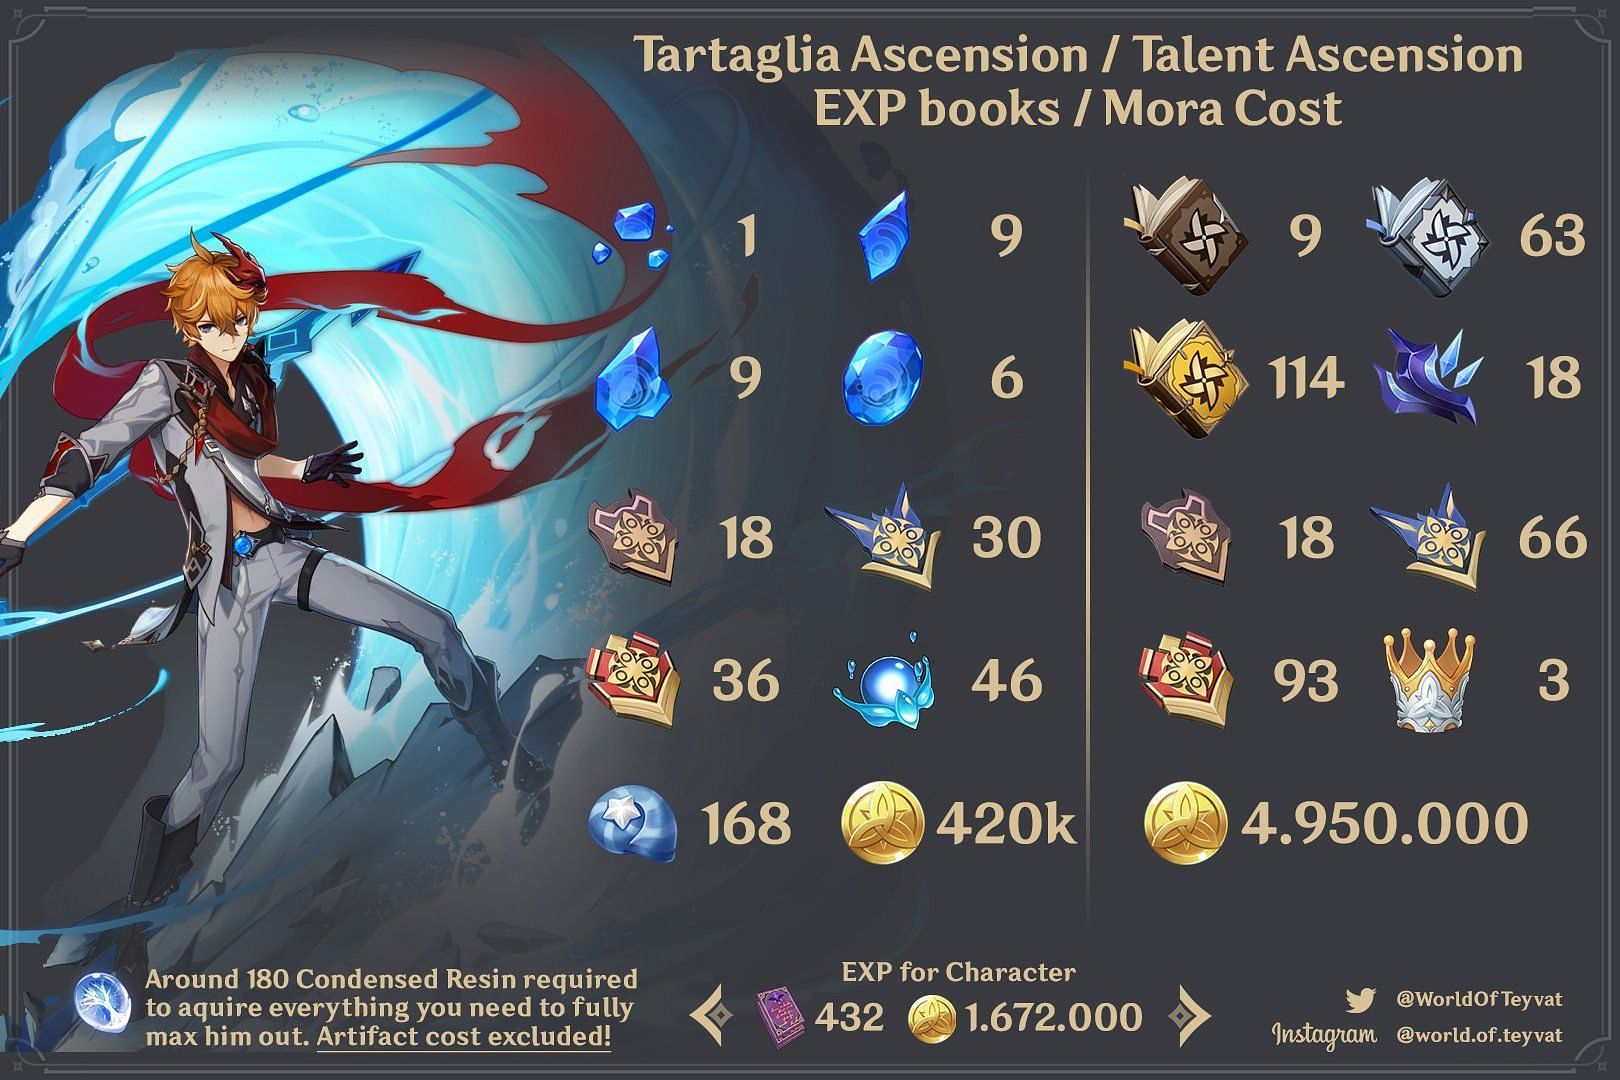 Genshin, Talent Upgrade Guide 4.1 - How To Get Level Up Books